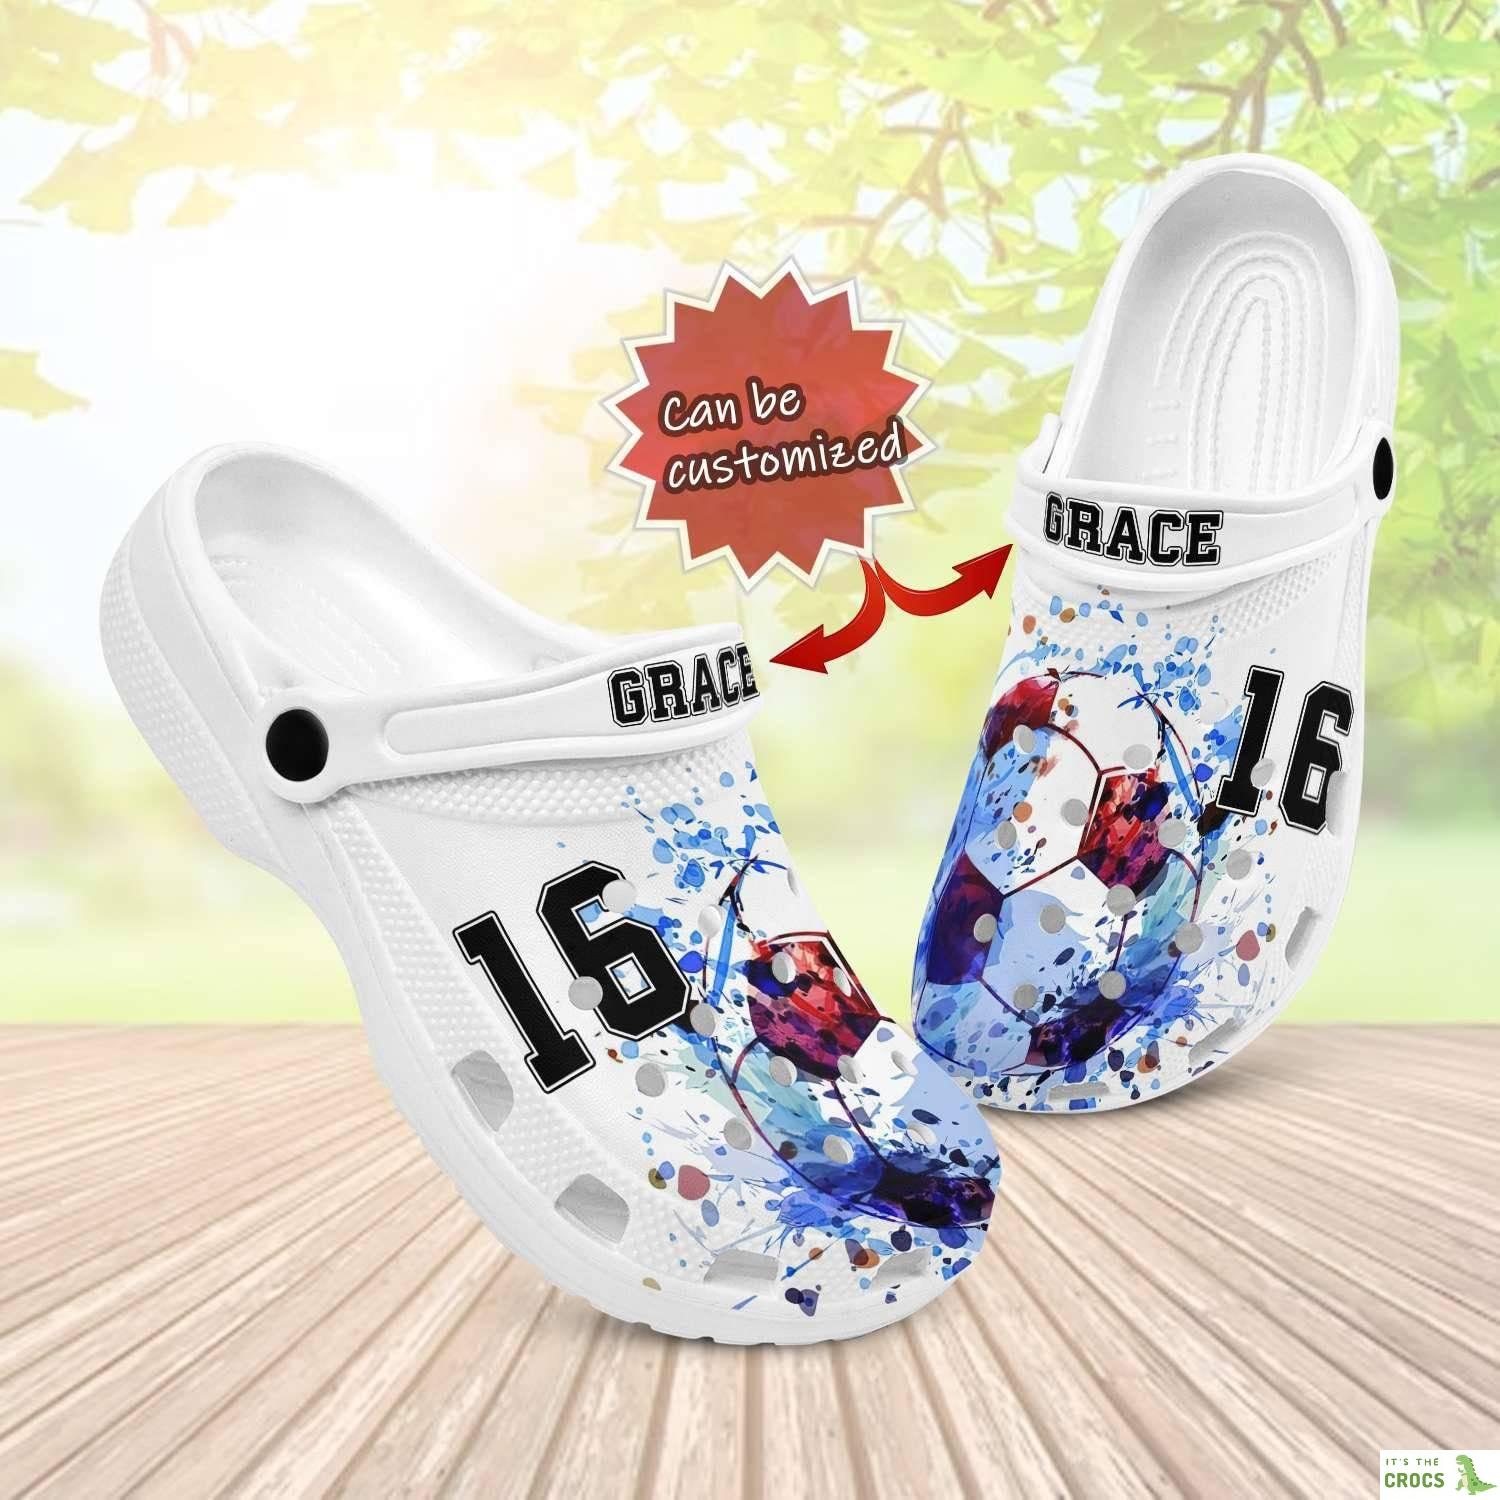 Customized Watercolor Soccer Ball Clogs Fun Gift for Adults Kids Birthday